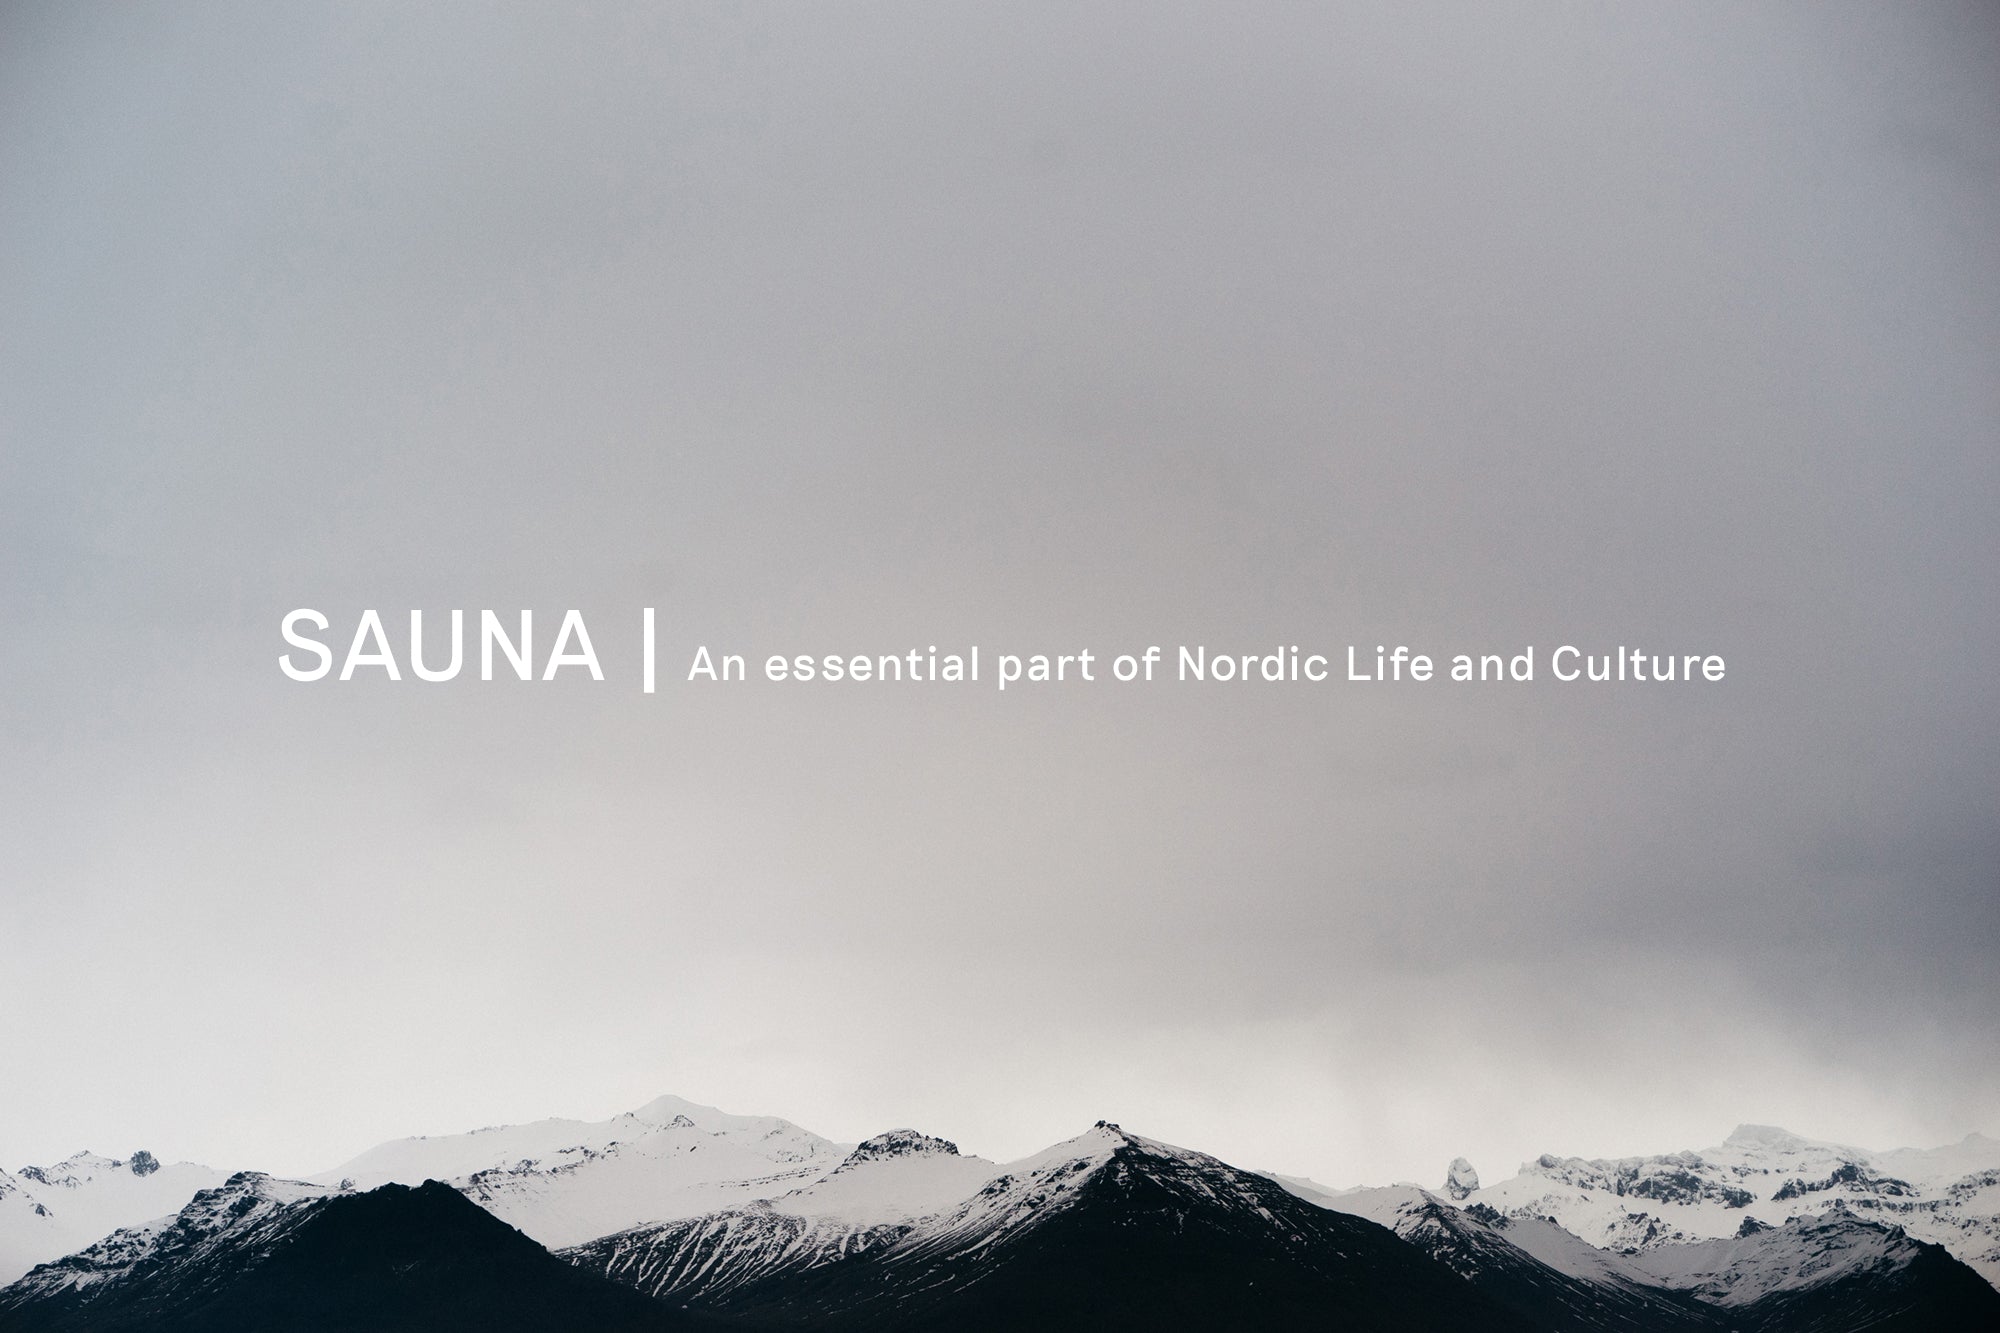 Sauna | An essential part of Nordic Life and Culture